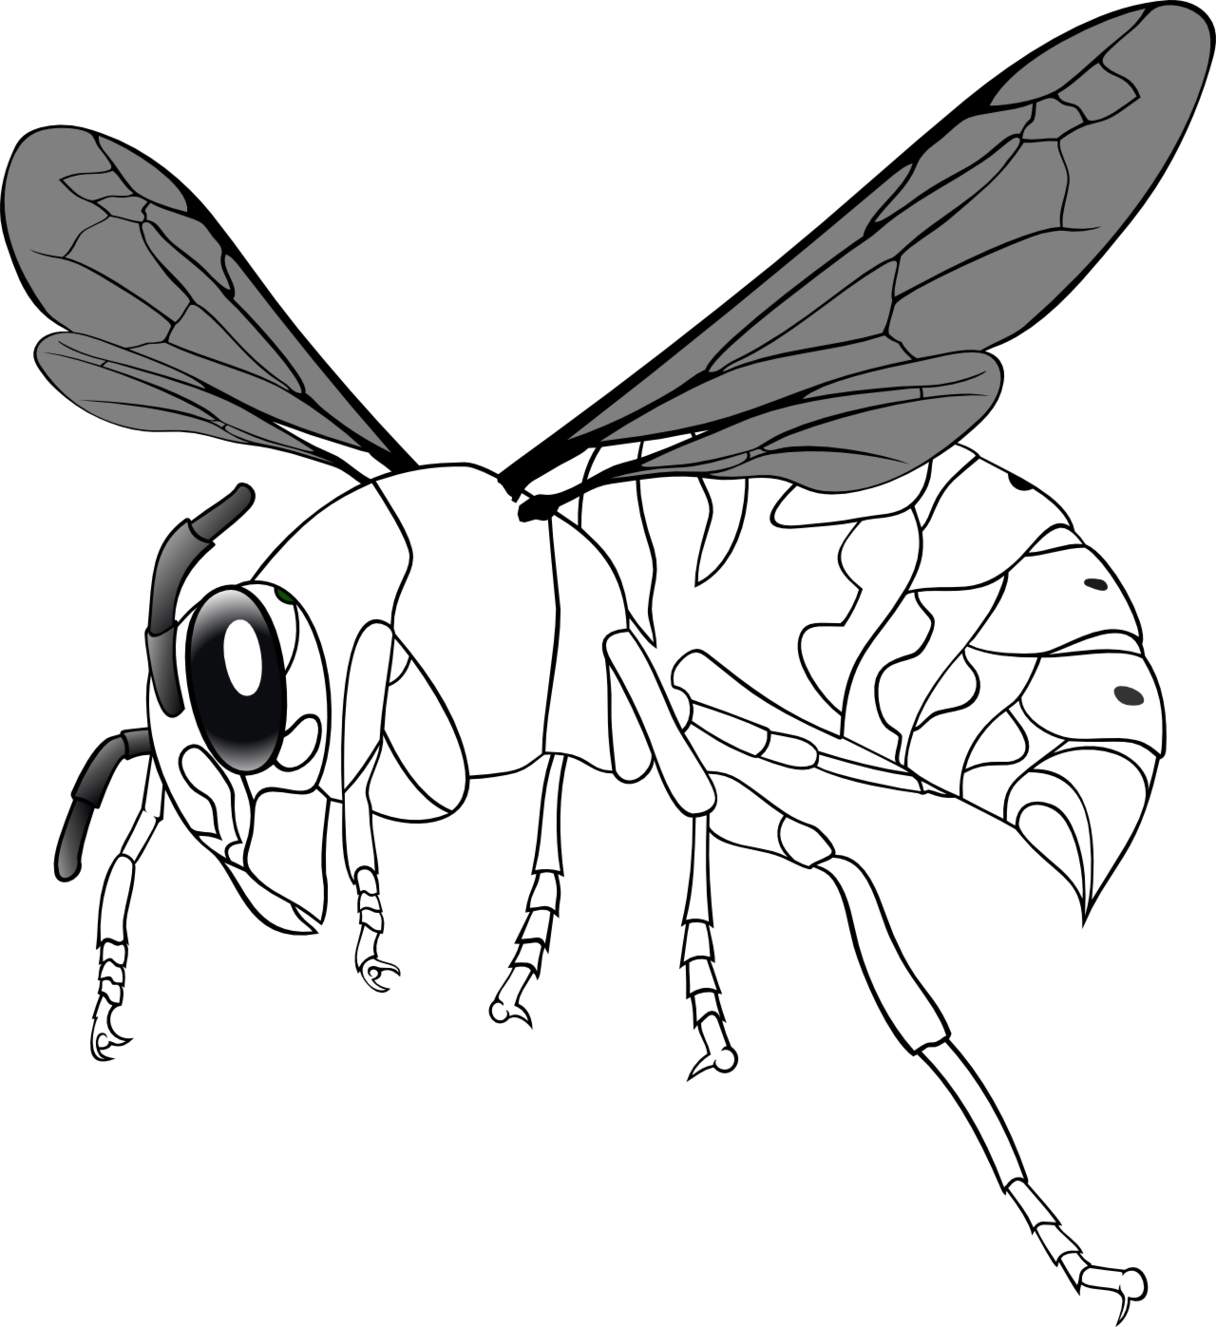 Bee Line Drawing Clipart - Free to use Clip Art Resource